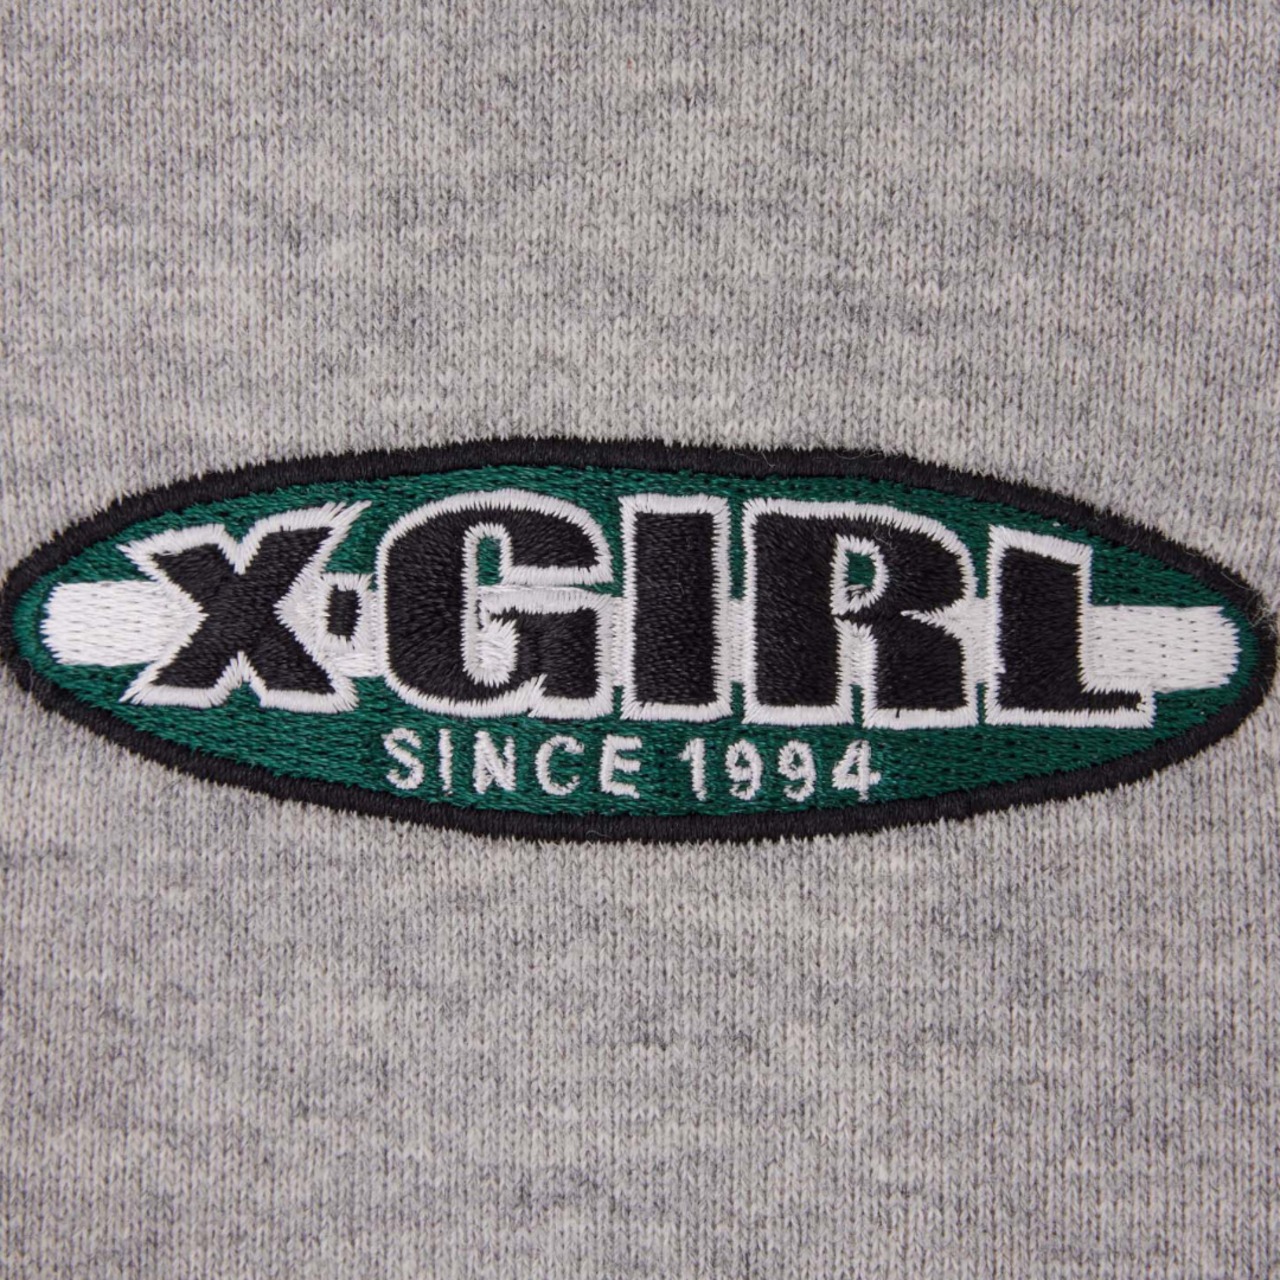 【X-girl】CONTRAST STRIPE ZIP UP SWEAT 【エックスガール】